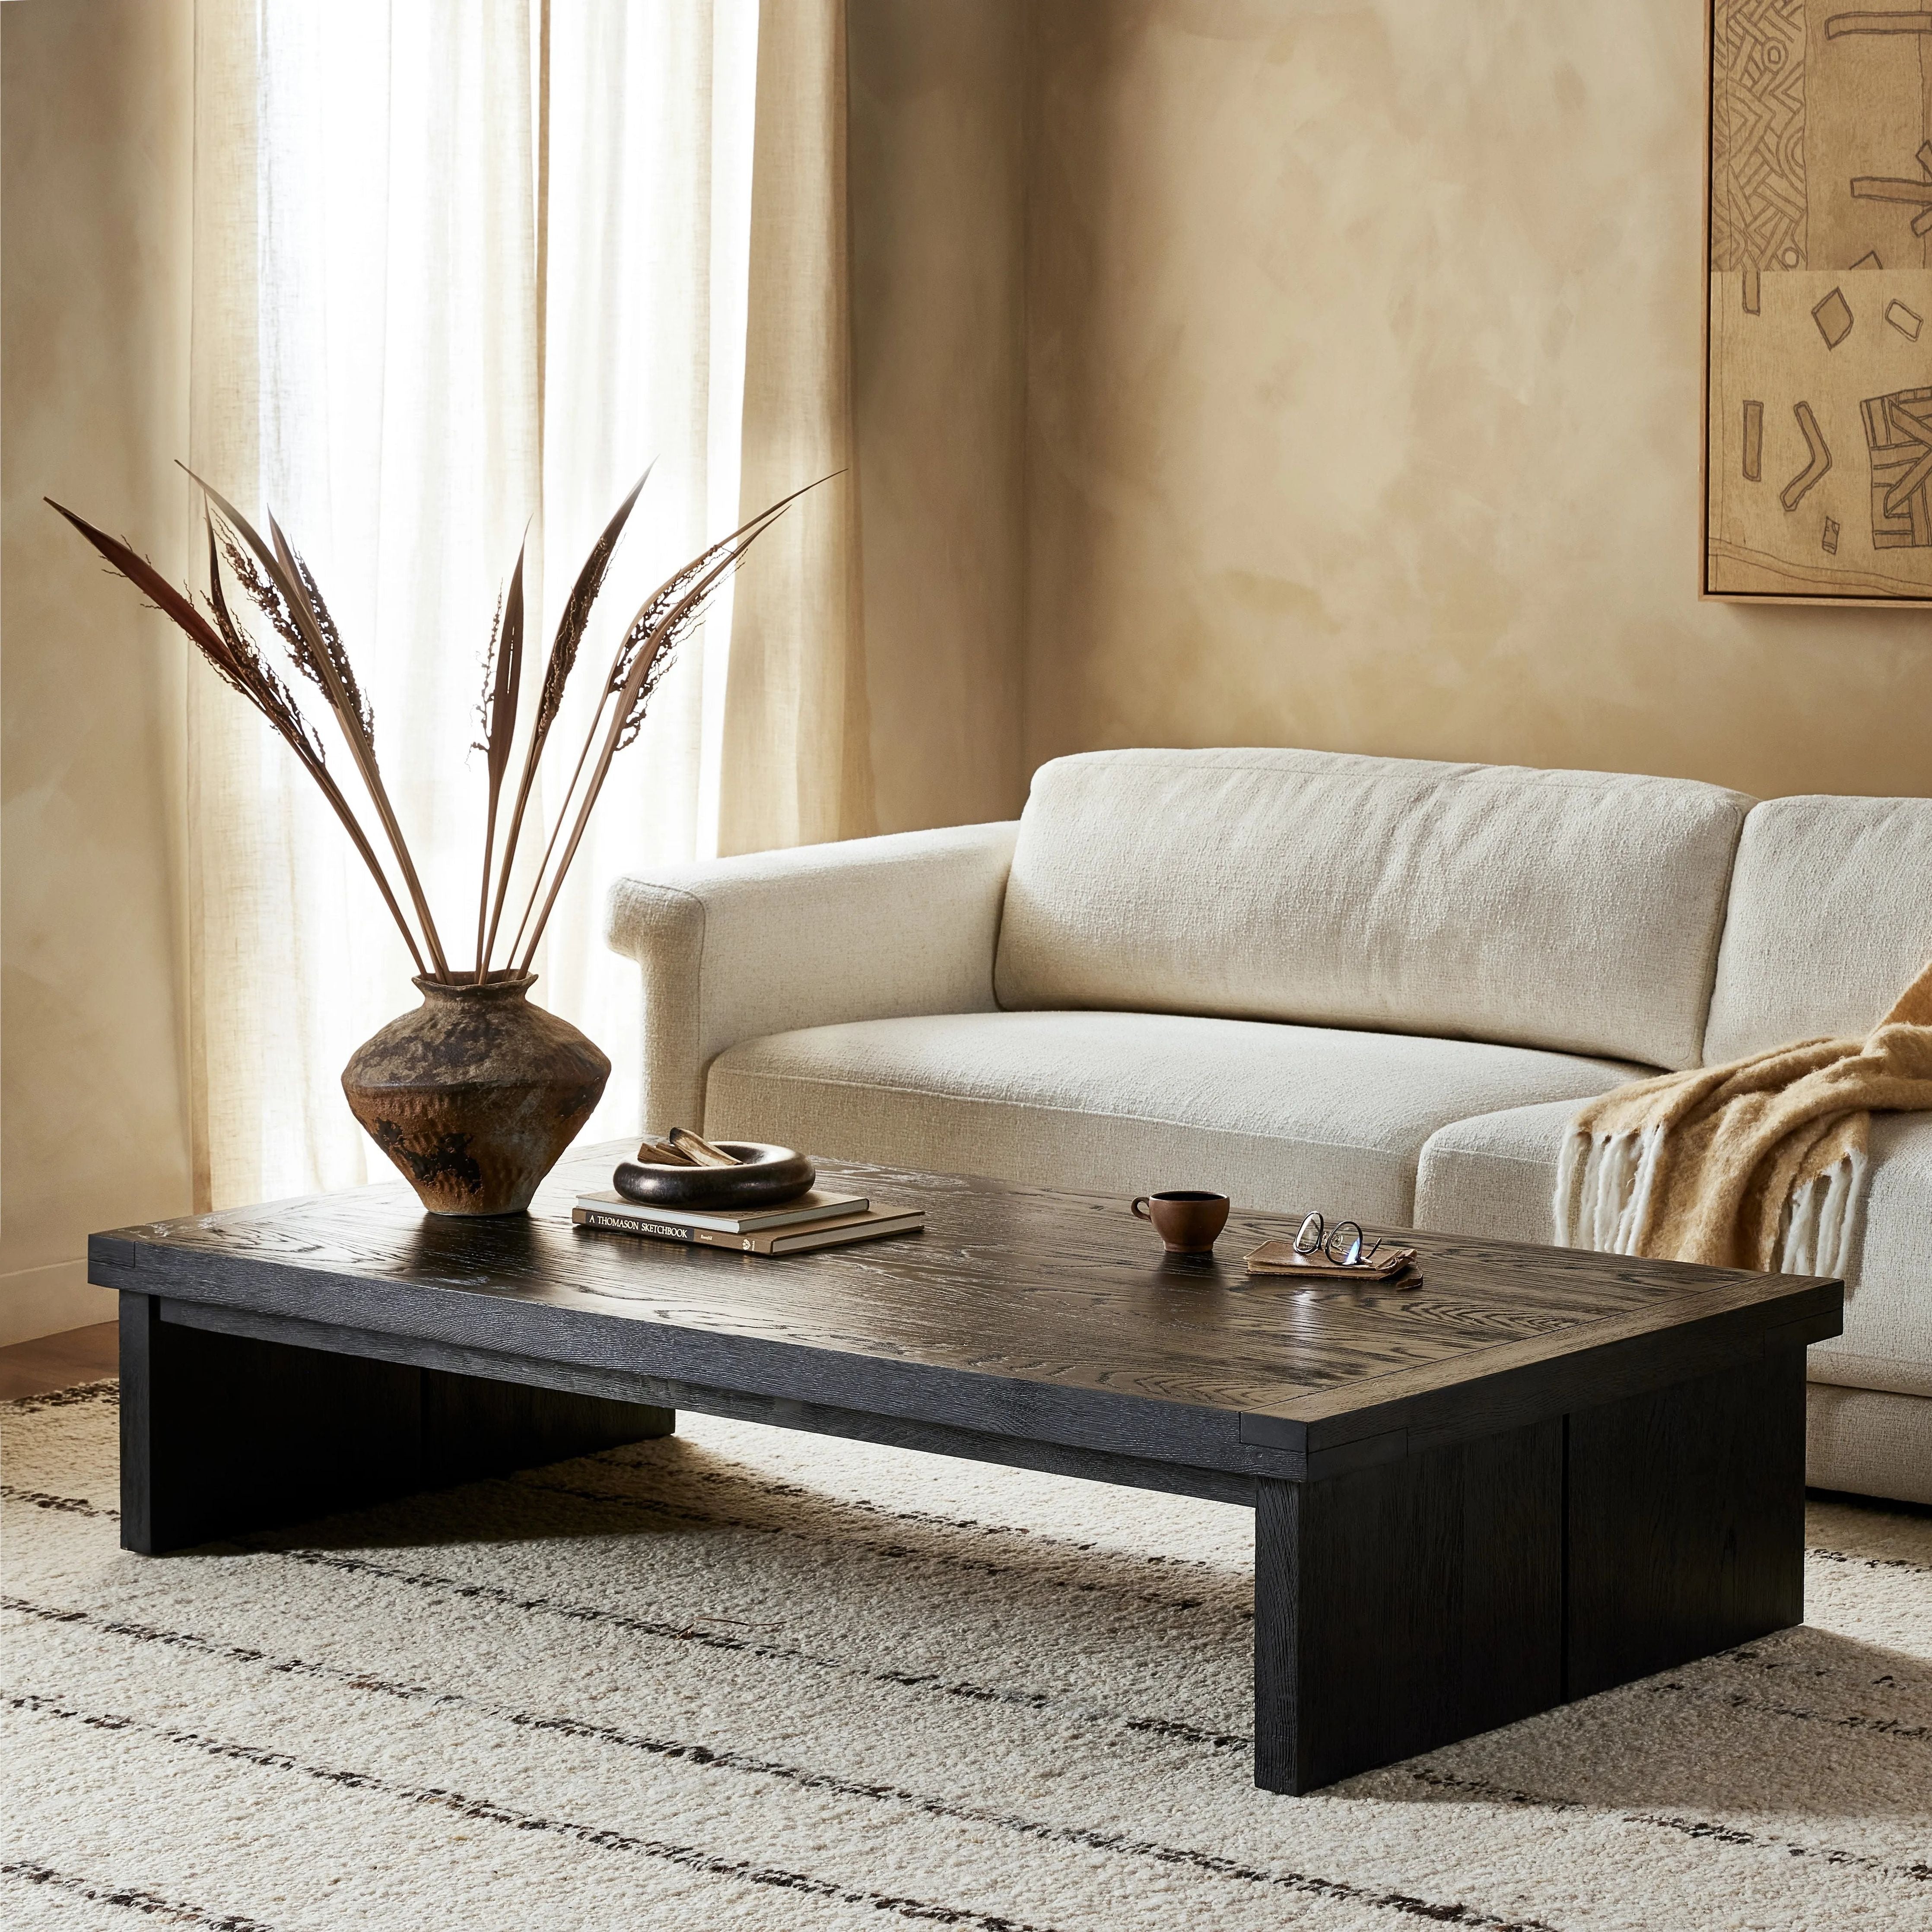 Black-finished oak shapes a streamlined coffee table with a rich while minimalist look.Collection: Bennet Amethyst Home provides interior design, new home construction design consulting, vintage area rugs, and lighting in the Park City metro area.